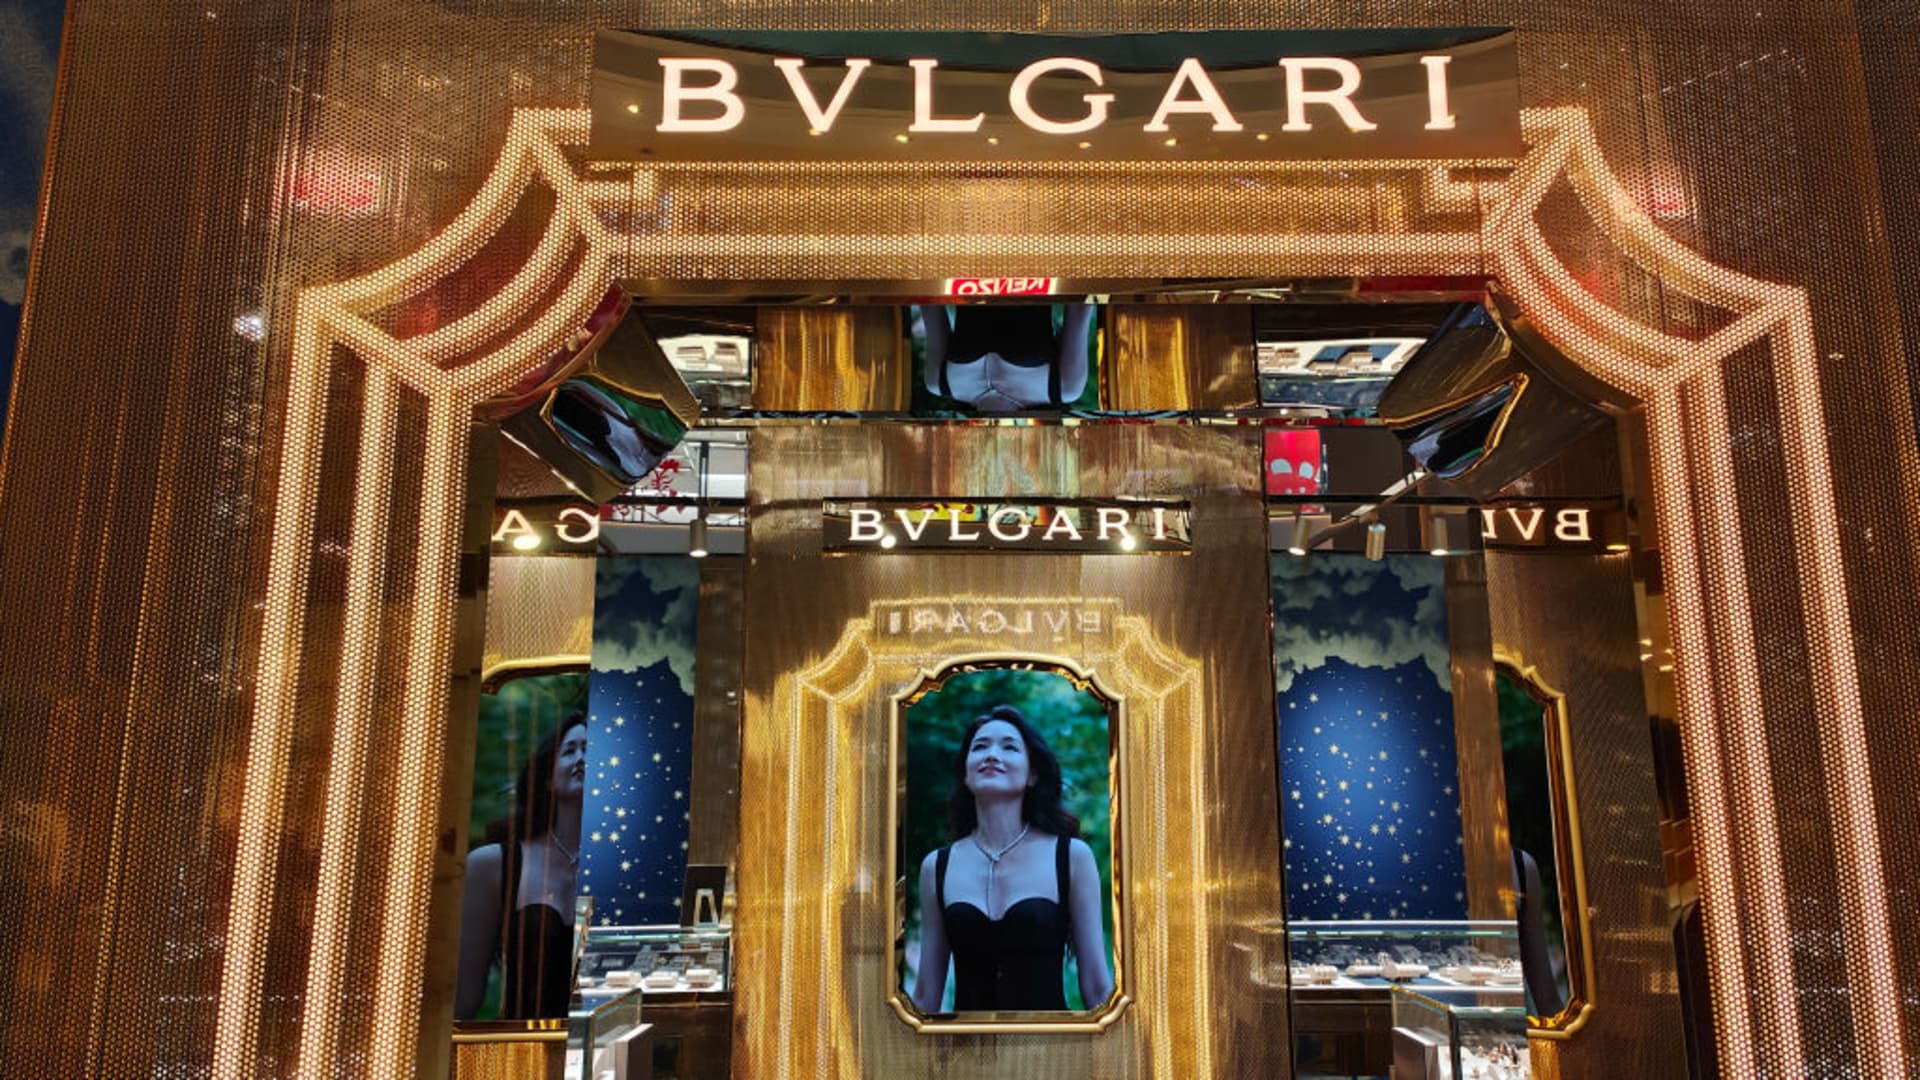 A Bvlgari store in a shopping mall in Shanghai, China on January 12, 2023.